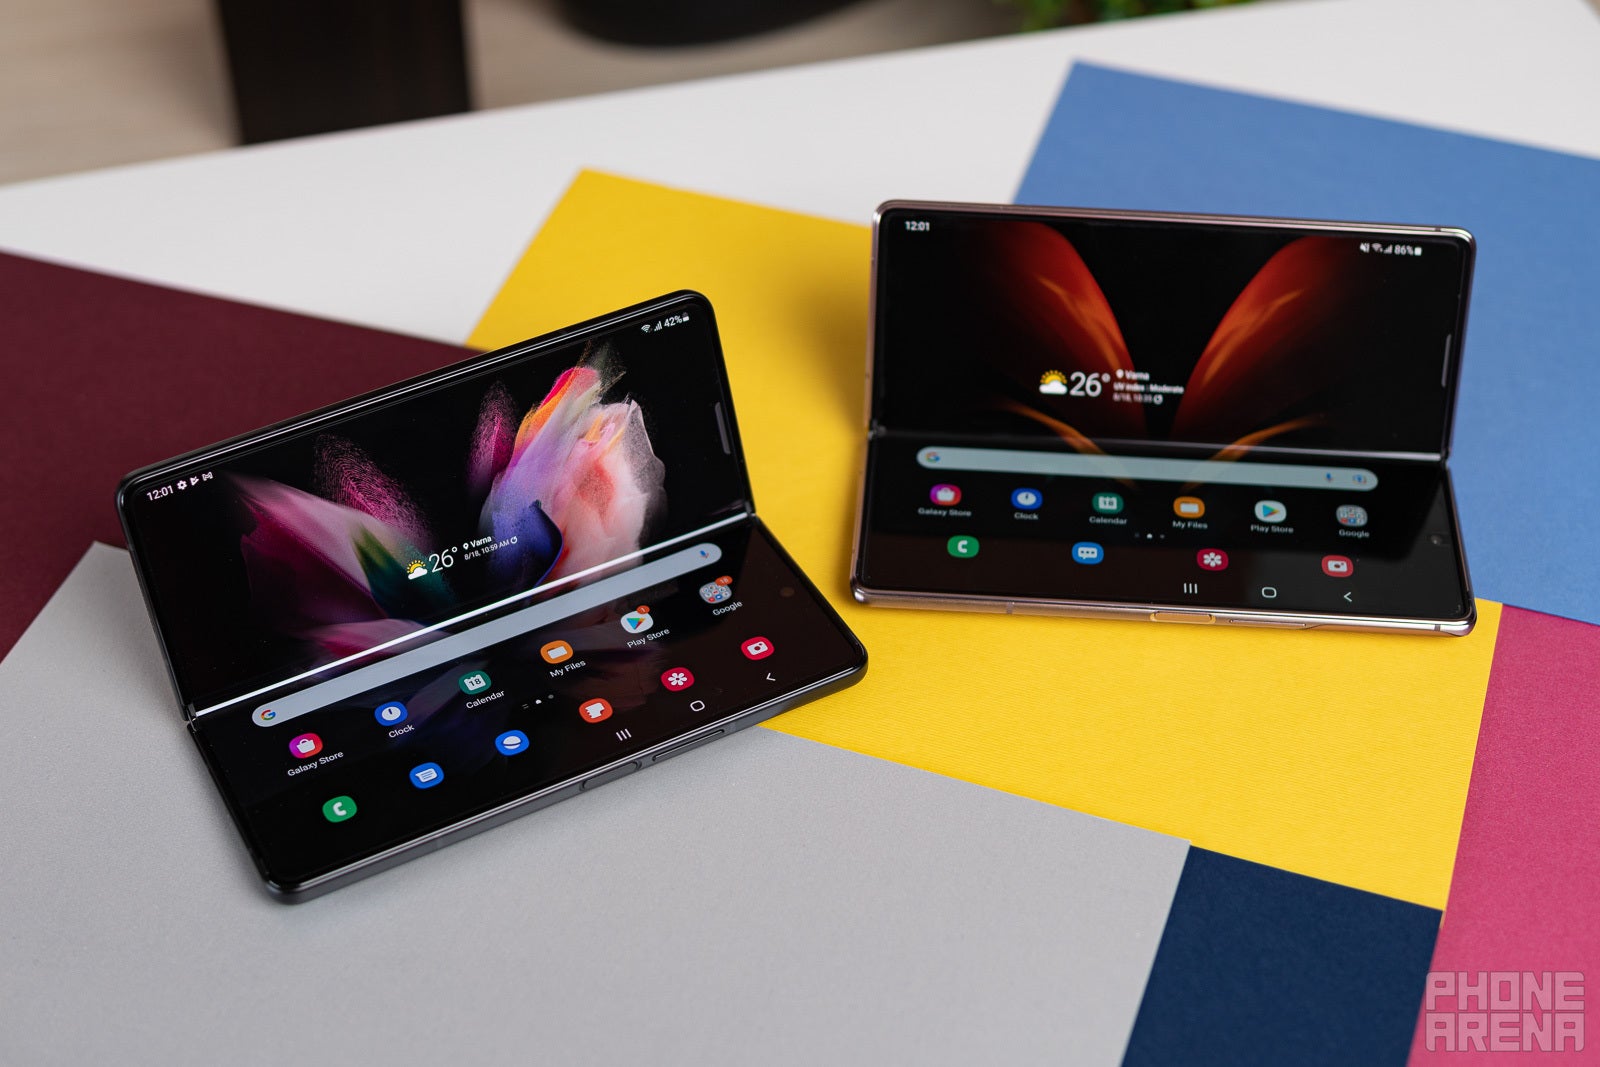 Galaxy Z Fold 2 and Z Fold 3 looking good - Gone but not forgotten: the original Galaxy Fold gets Android 12!